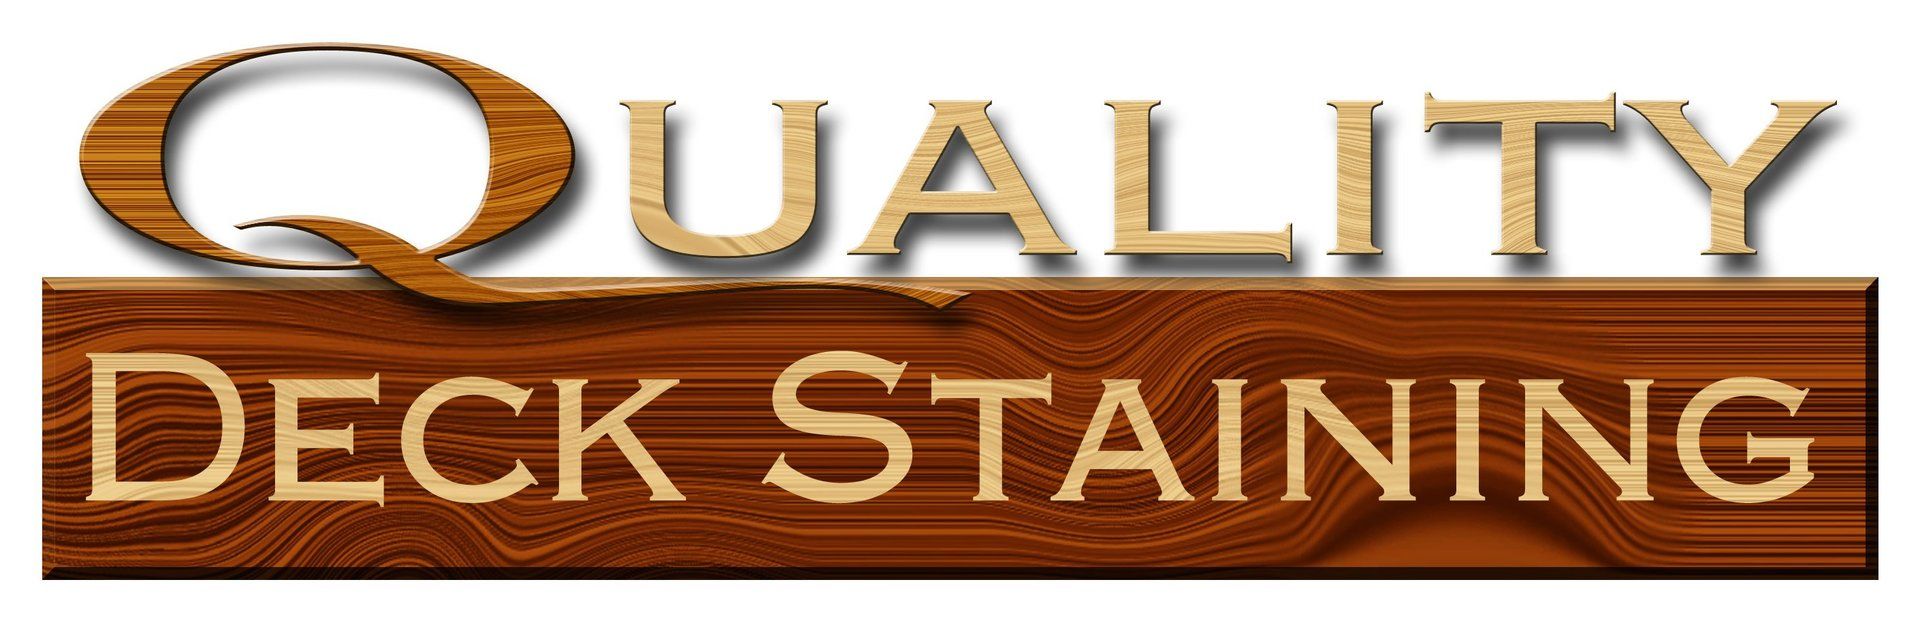 Quality Deck Staining - Logo